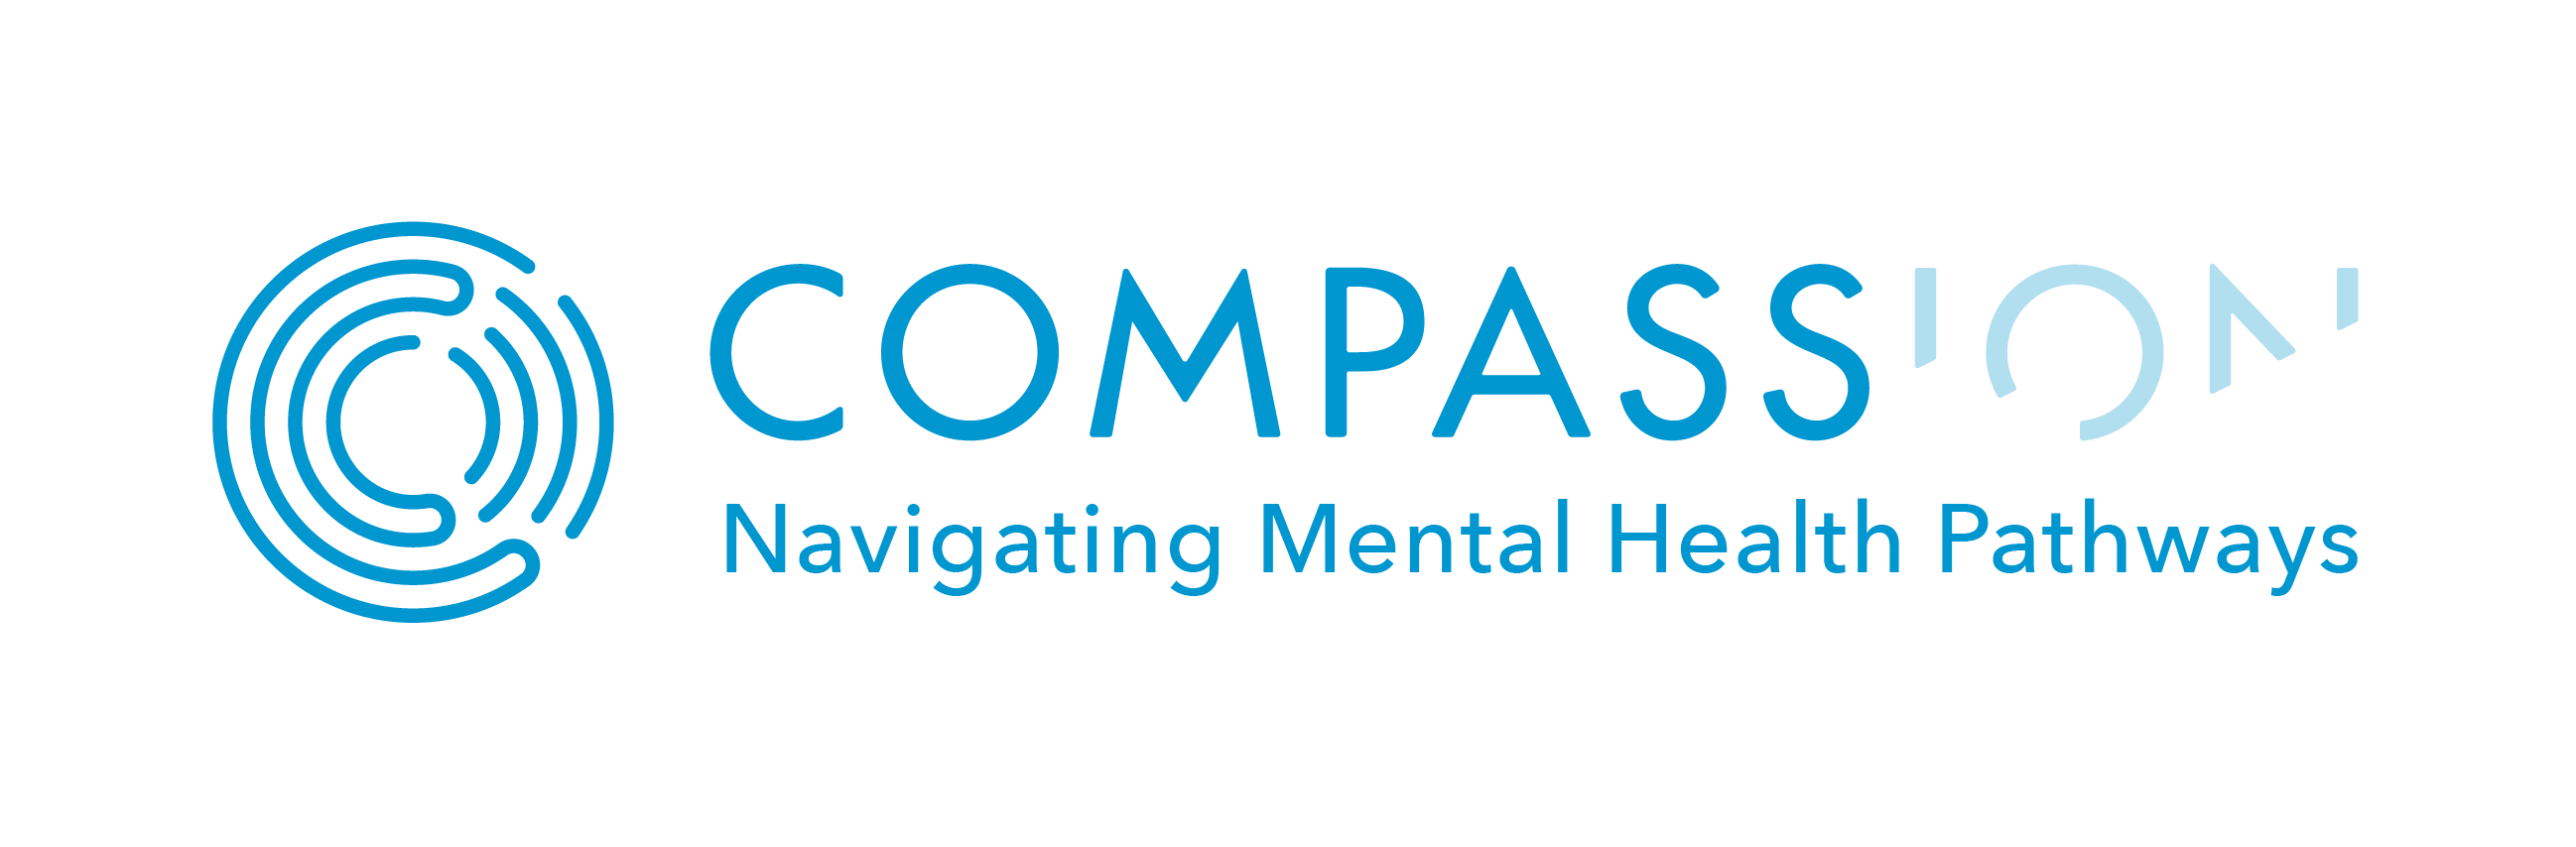 COMPASS Pathways announces publication of positive data from treatment-resistant depression phase 2 clinical trial of COMP360 psilocybin alongside antidepressants in Nature journal, Neuropsychopharmacology